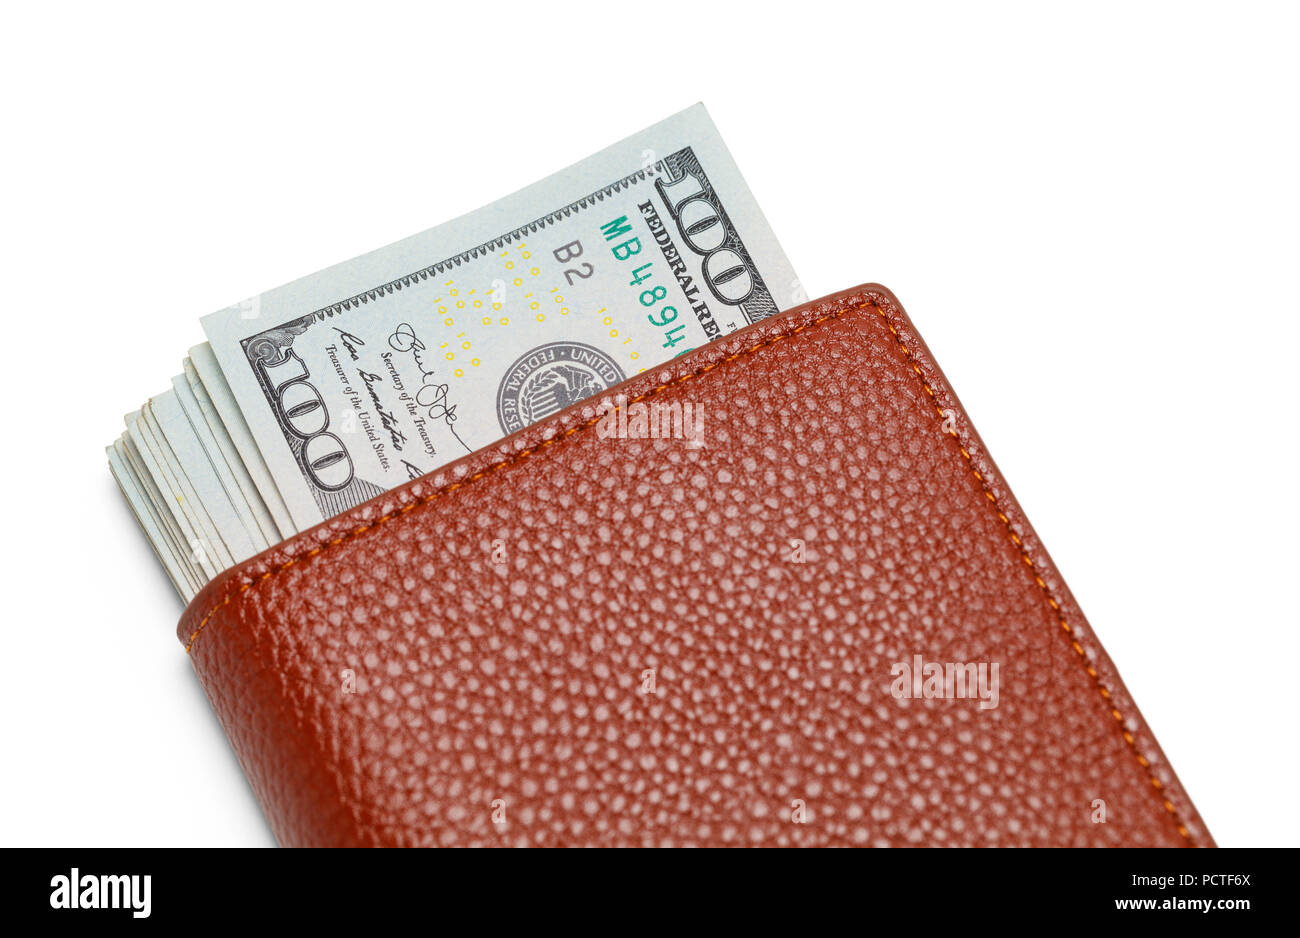 Leather Wallet Full of Hundred Dollar Bills Isolated on White. Stock Photo